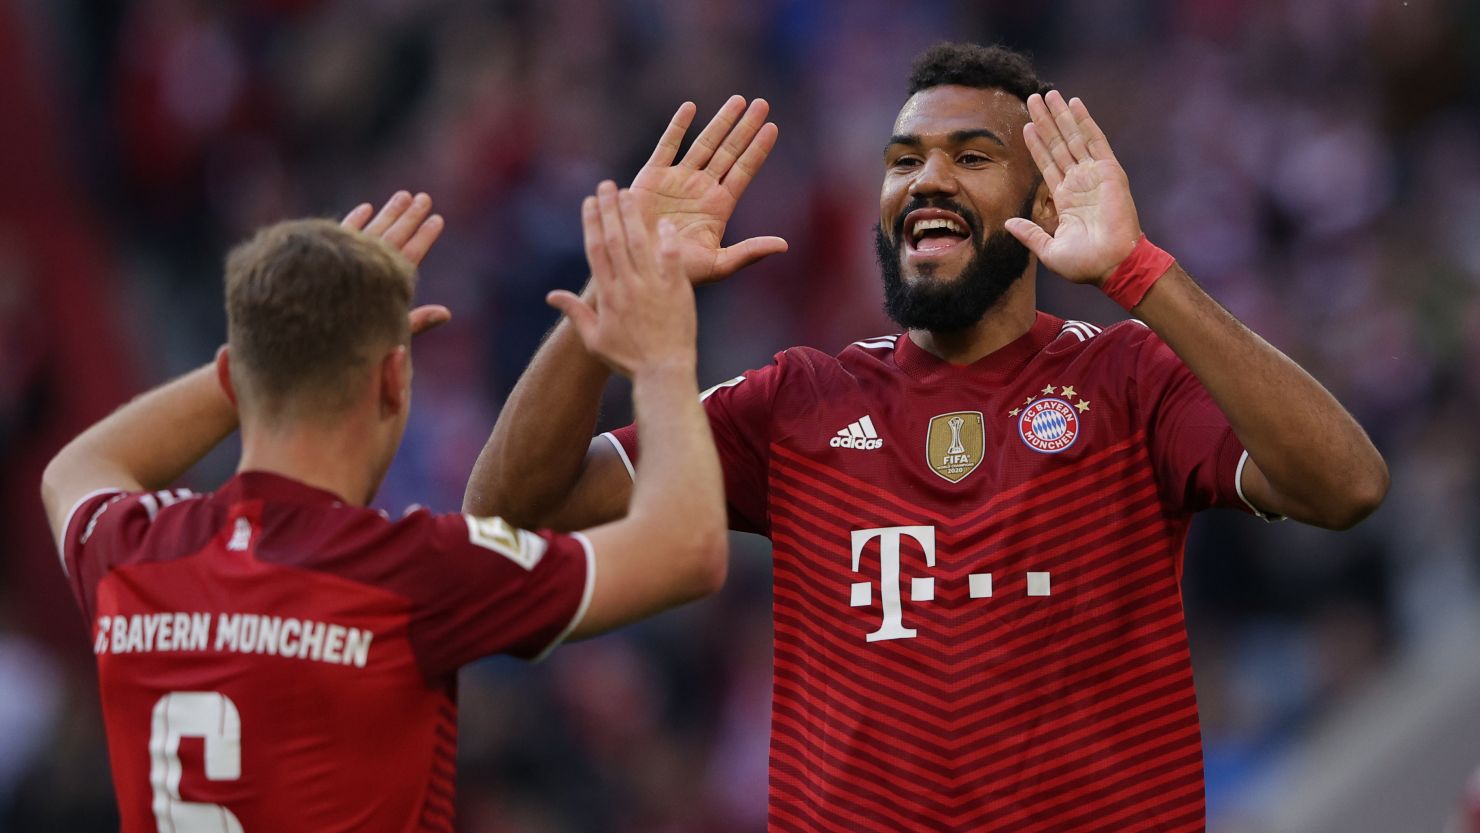 Eric Maxim Choupo-Moting celebrates with Joshua Kimmich after scoring in Bayern Munich's Bundesliga game against TSG Hoffenheim at the Allianz Arena on October 23, 2021 in Munich, Germany.